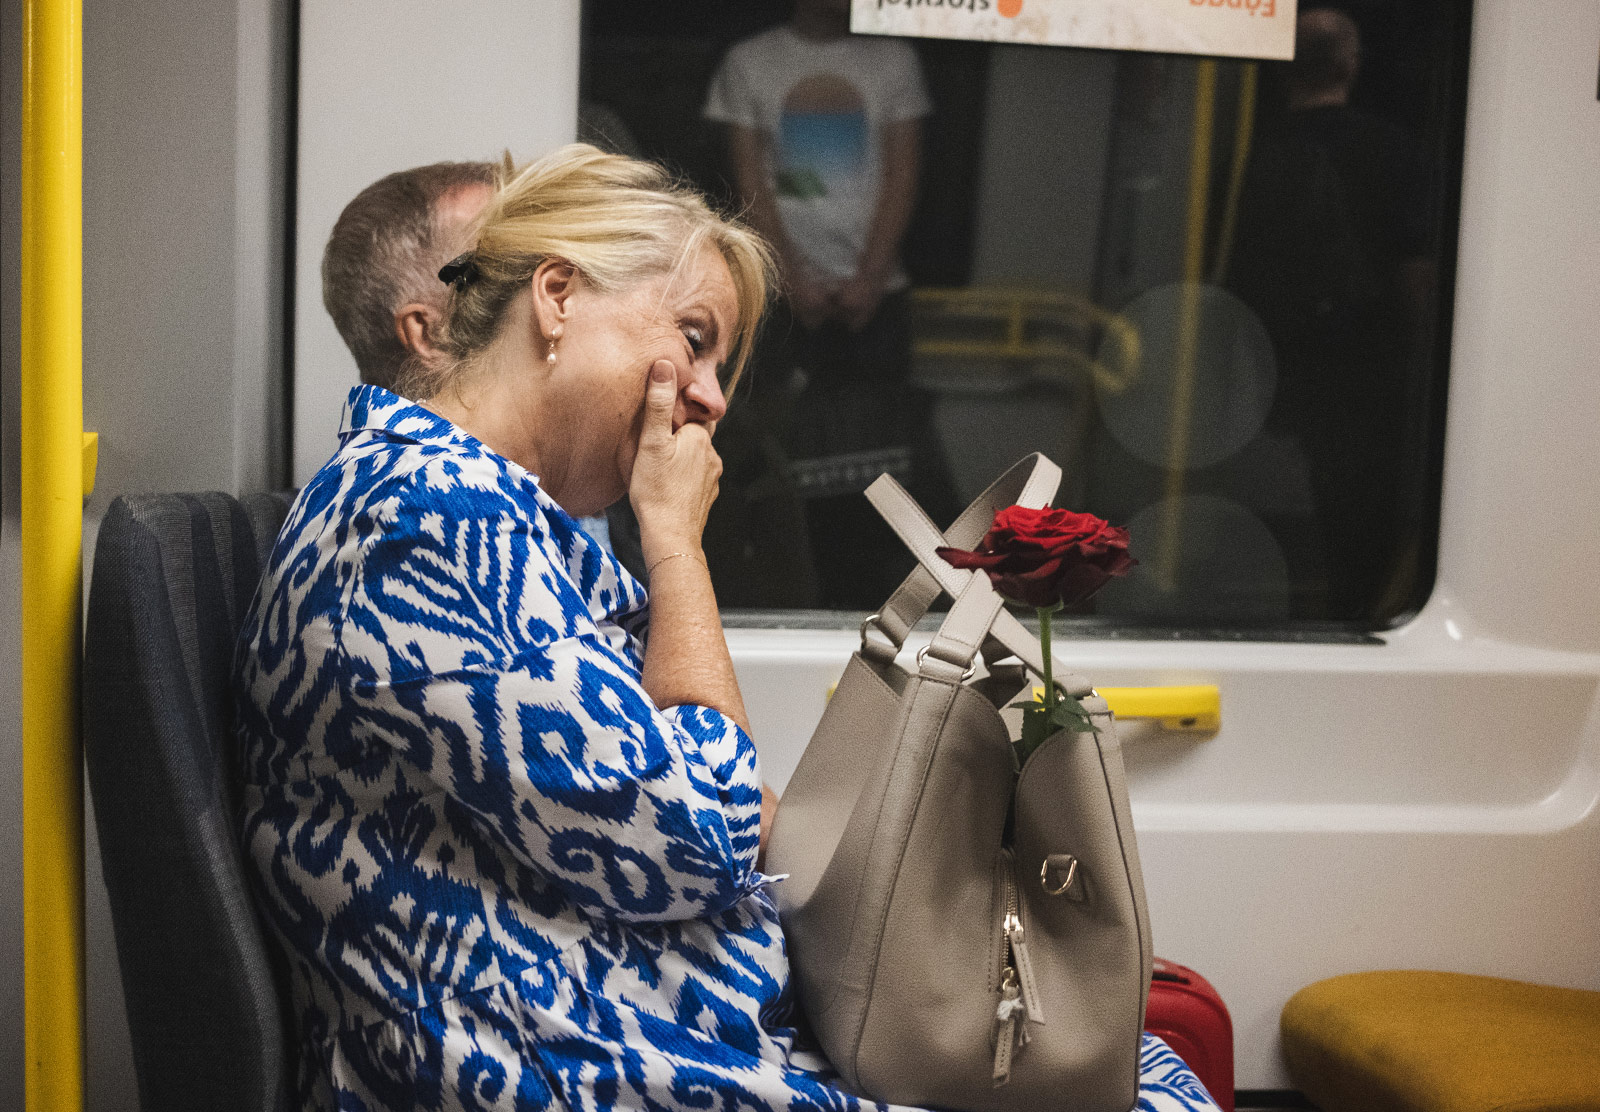 Laughing woman with rose in her handbag